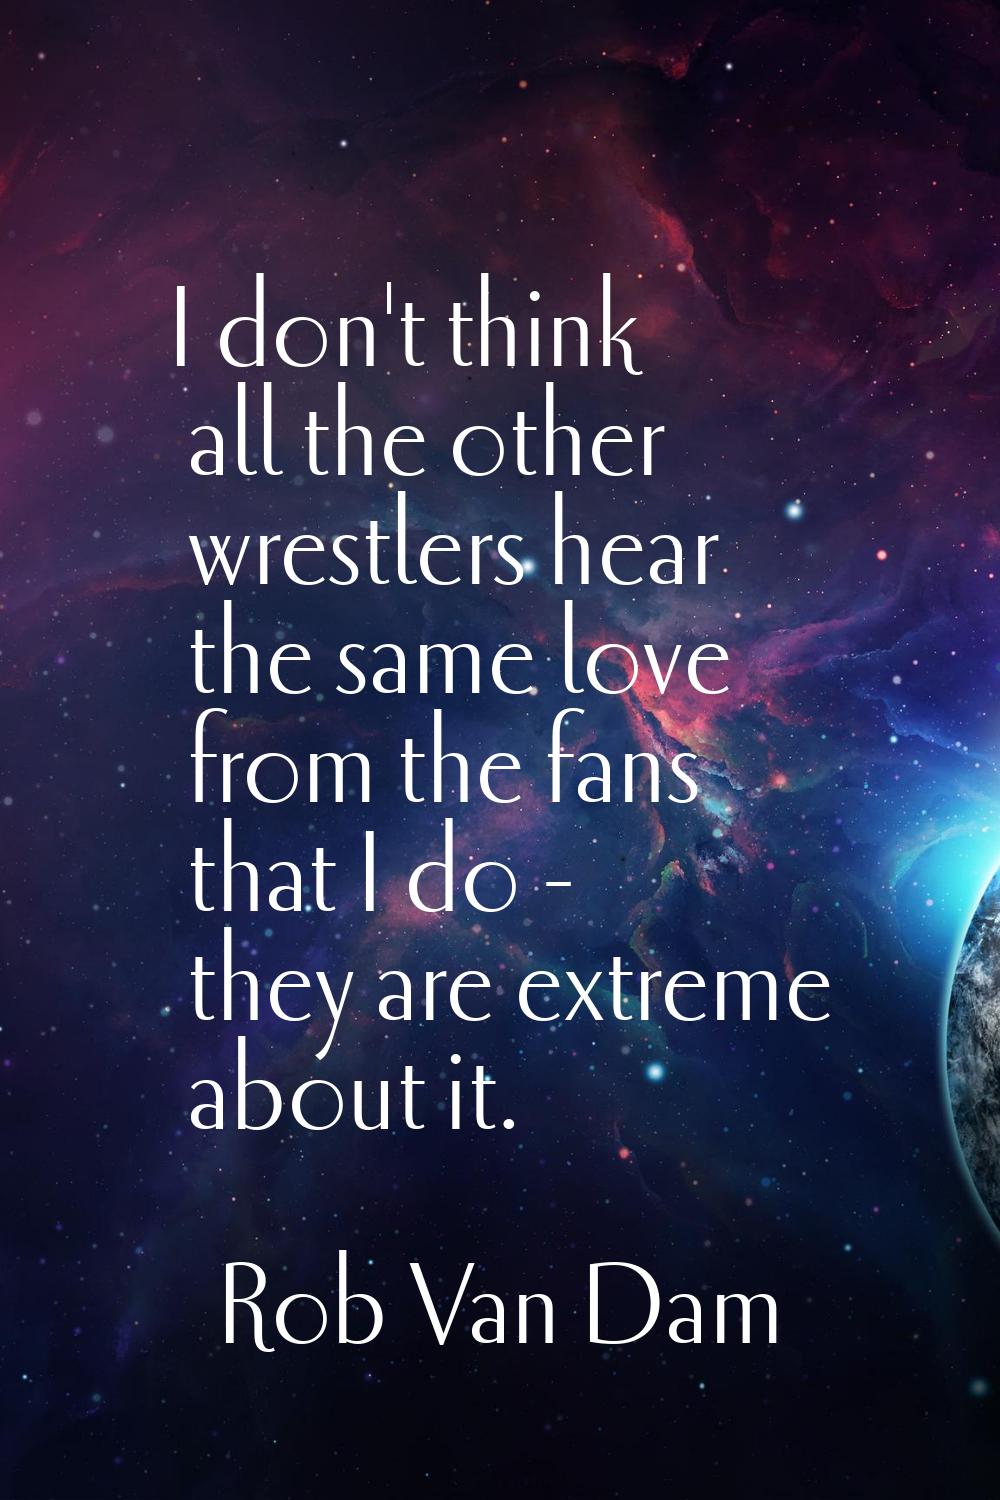 I don't think all the other wrestlers hear the same love from the fans that I do - they are extreme